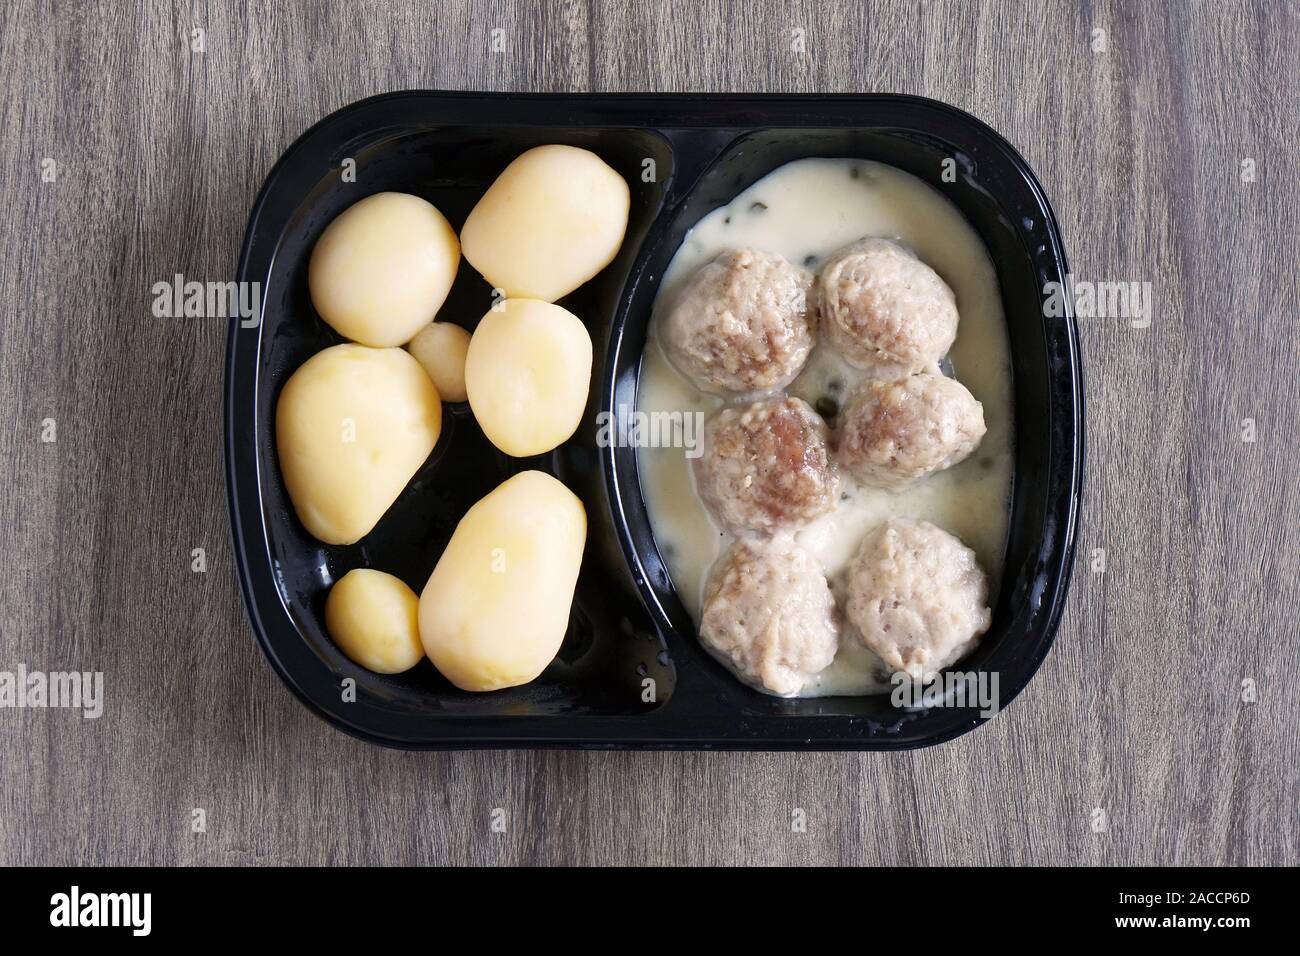 meatballs and potatoes microwavable instant ready meal or tv dinner, german dish known as Konigsberger Klopse Stock Photo